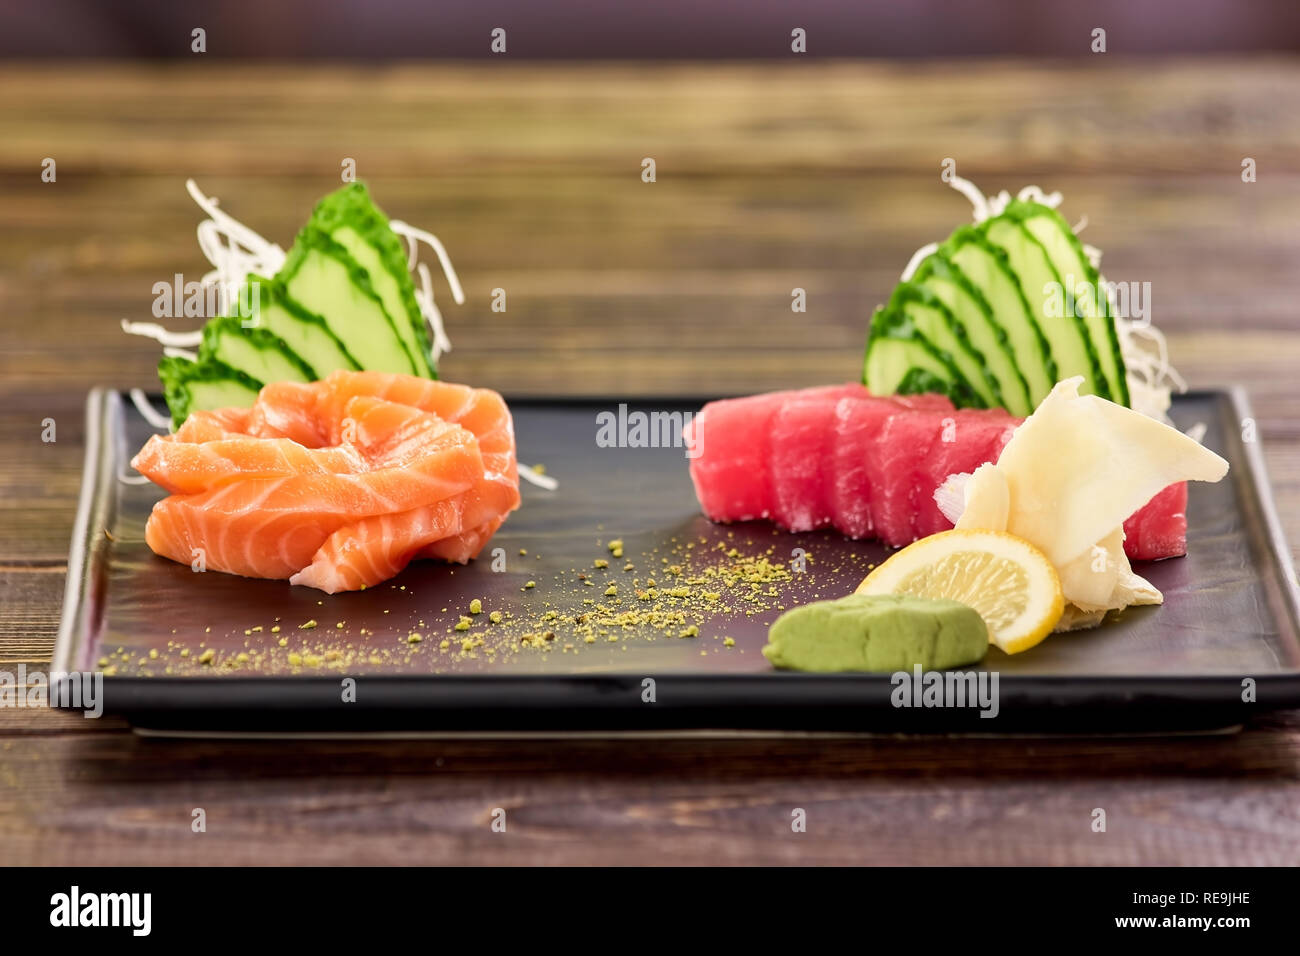 Sliced red and orange fish fillet and side dish. Salmon, tuna, cucumber slices, white ginger, wasabi and lemon. Stock Photo